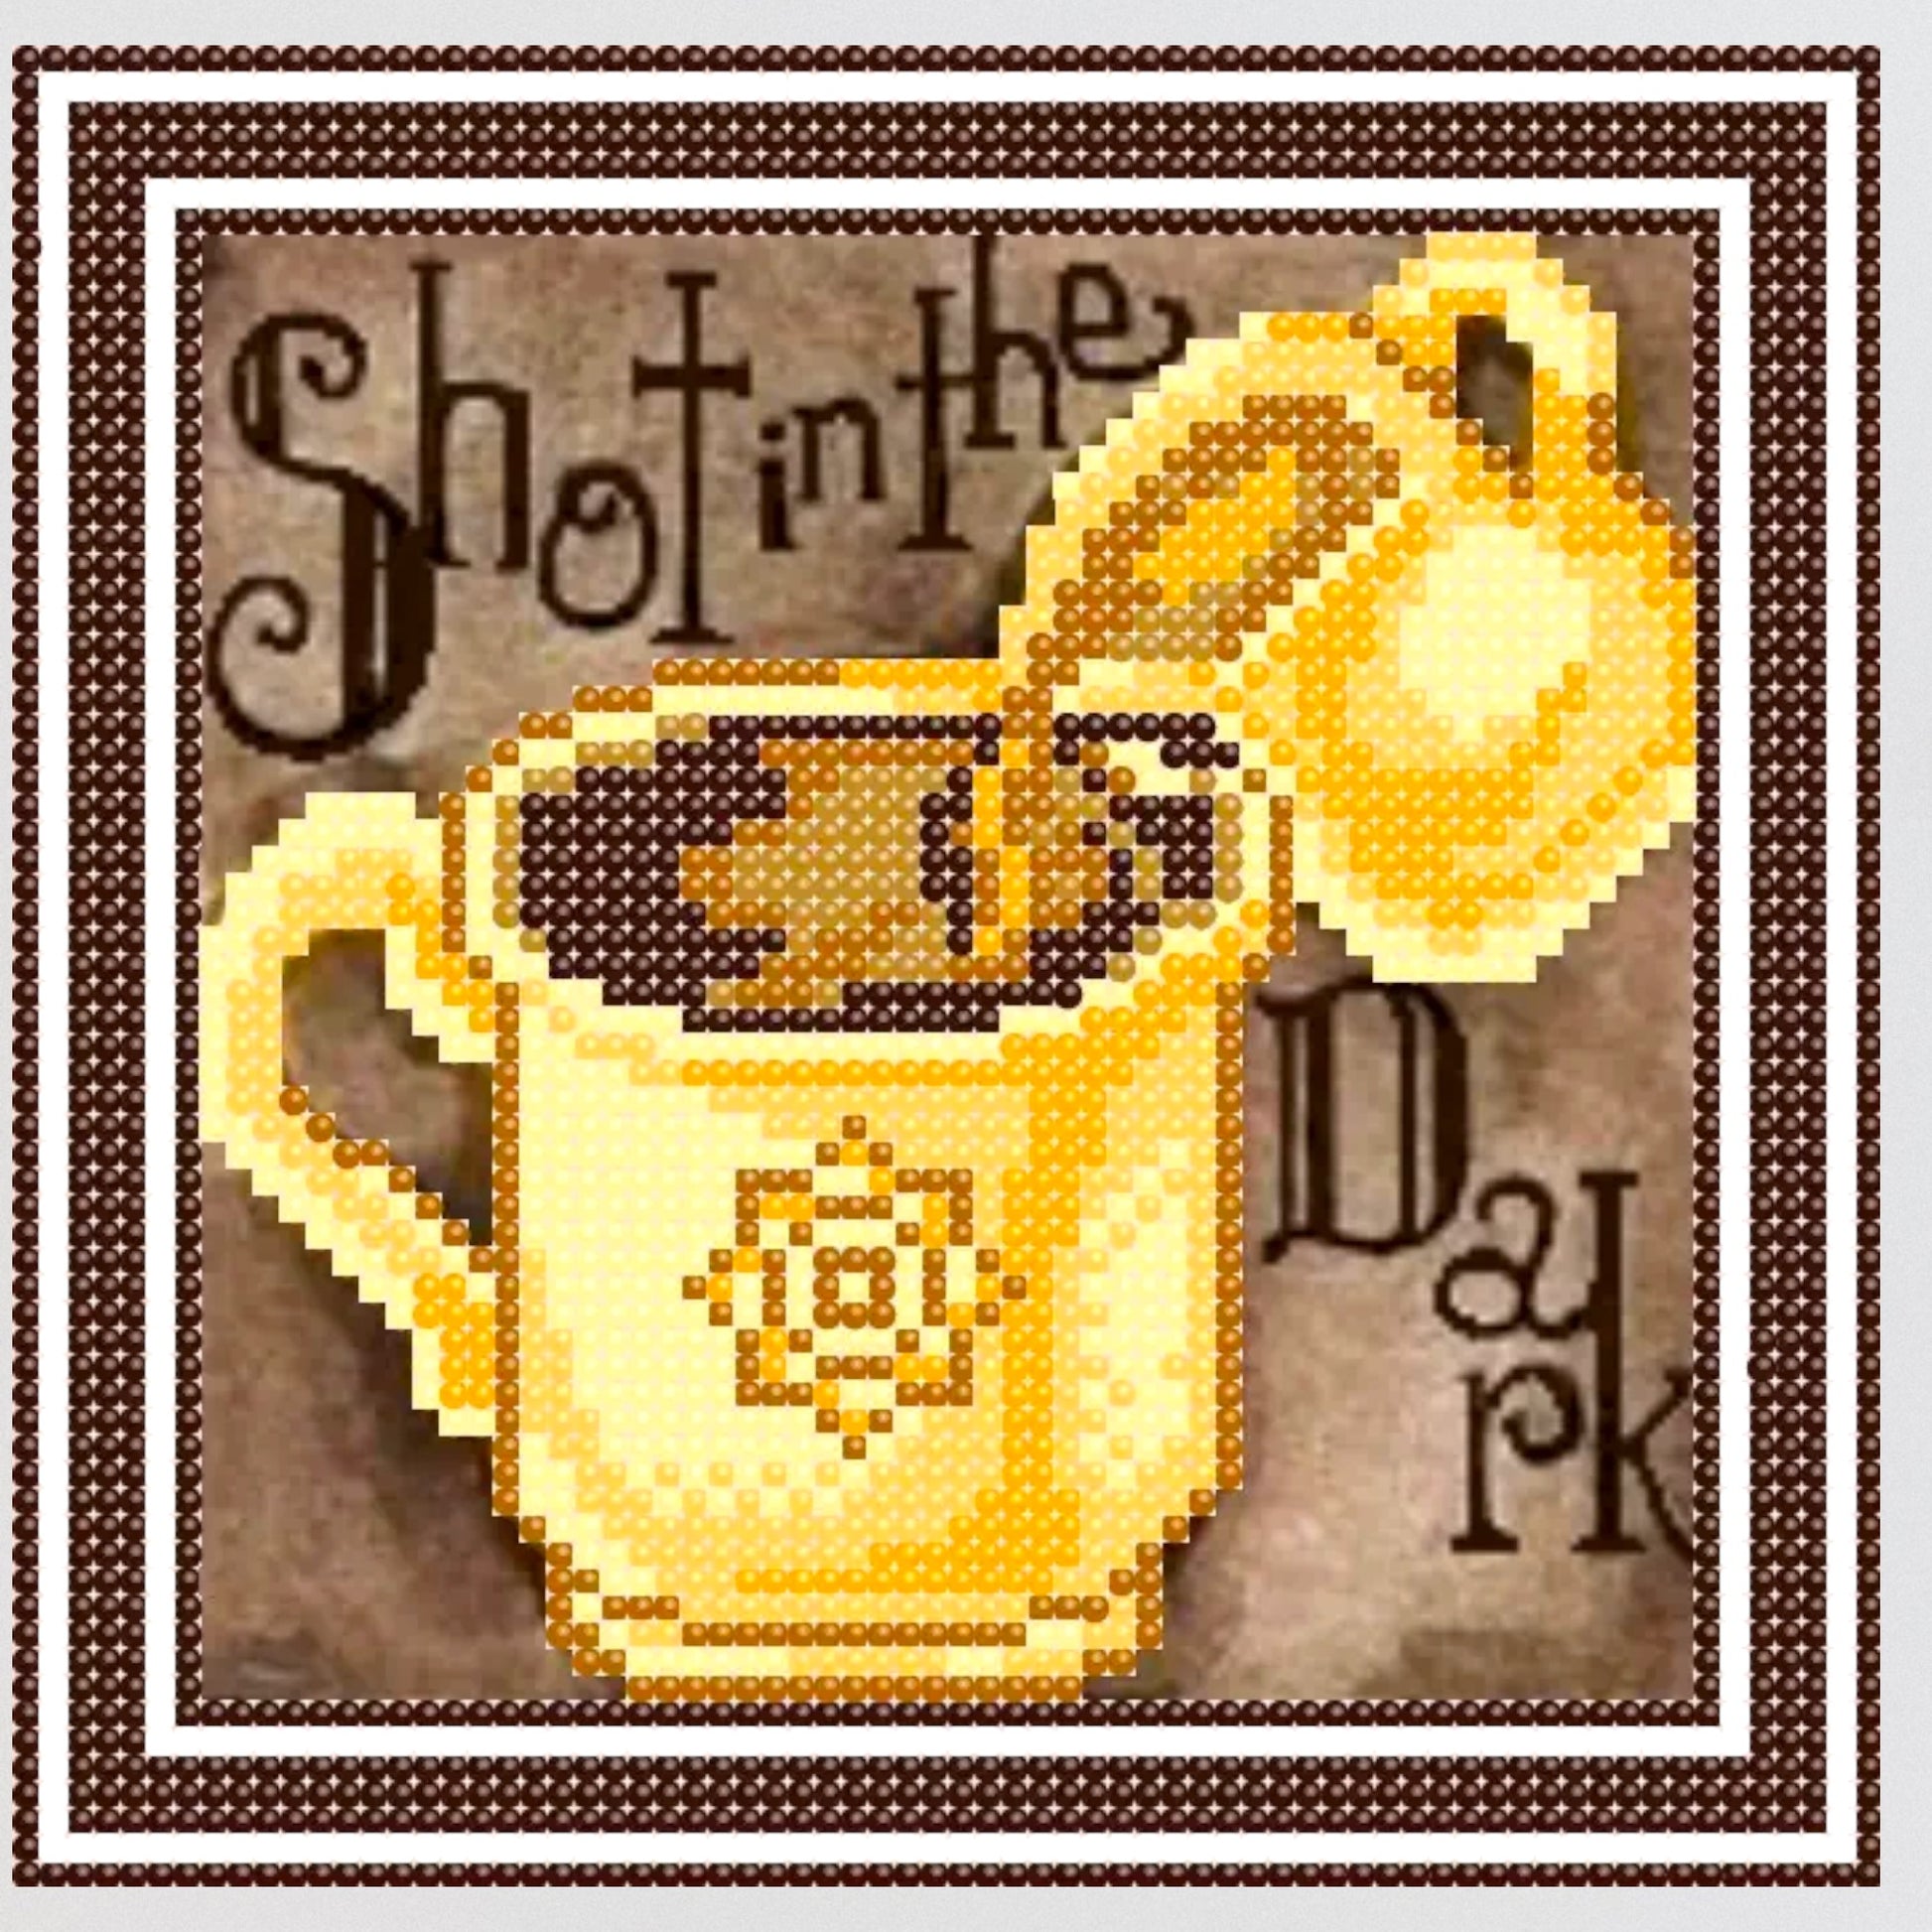 DIY Bead embroidery kit "Вlack coffee". size: 6.3 - 6.3in (16 - 16cm). - VadymShop